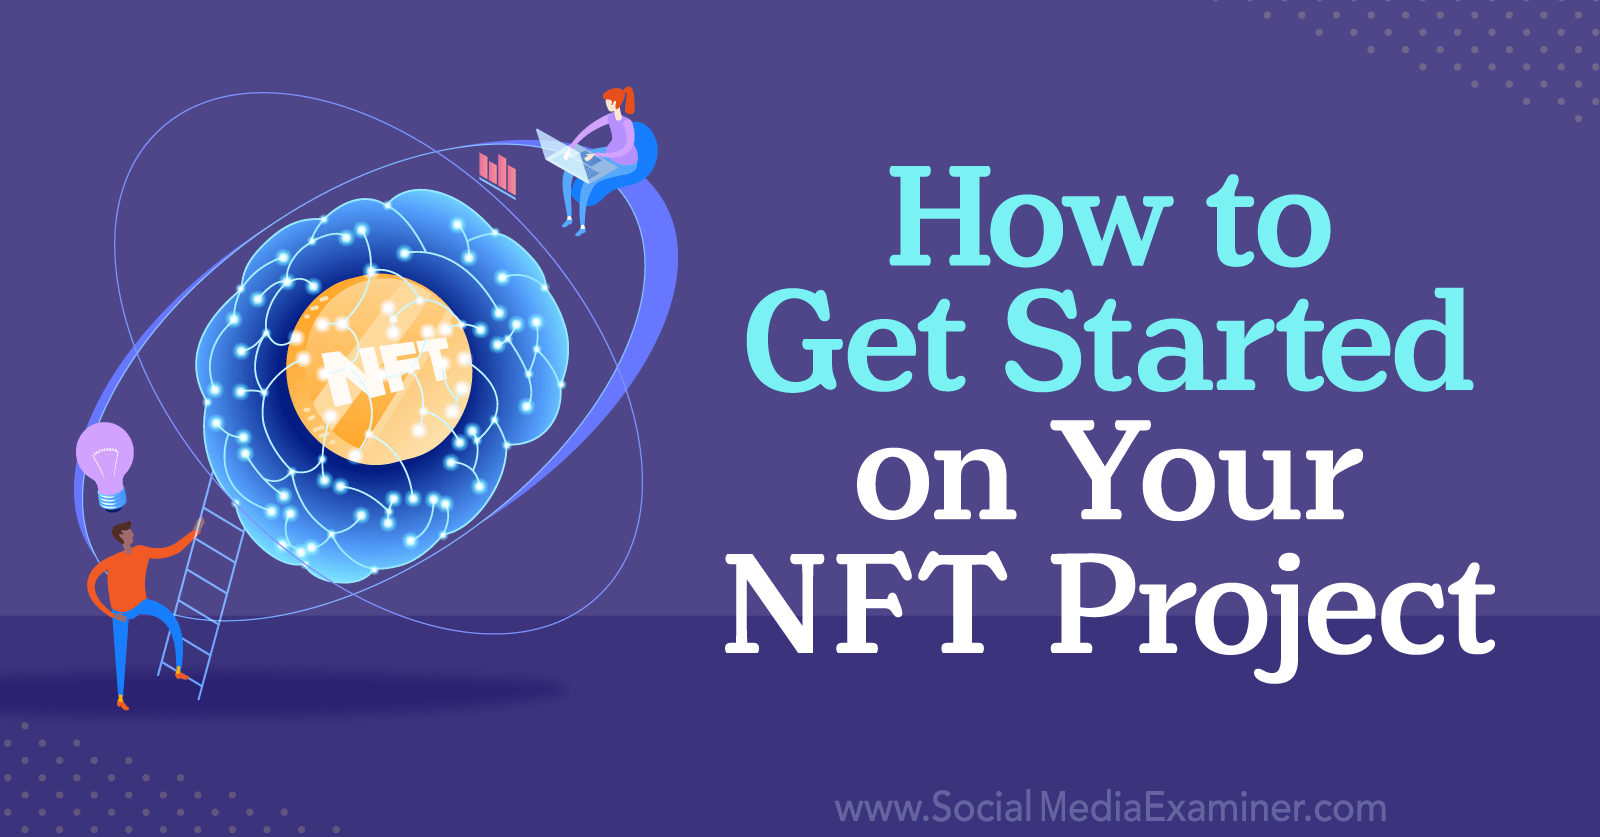 How to Get Started on Your NFT Project featuring insights from John Medina on the Crypto Business Podcast.